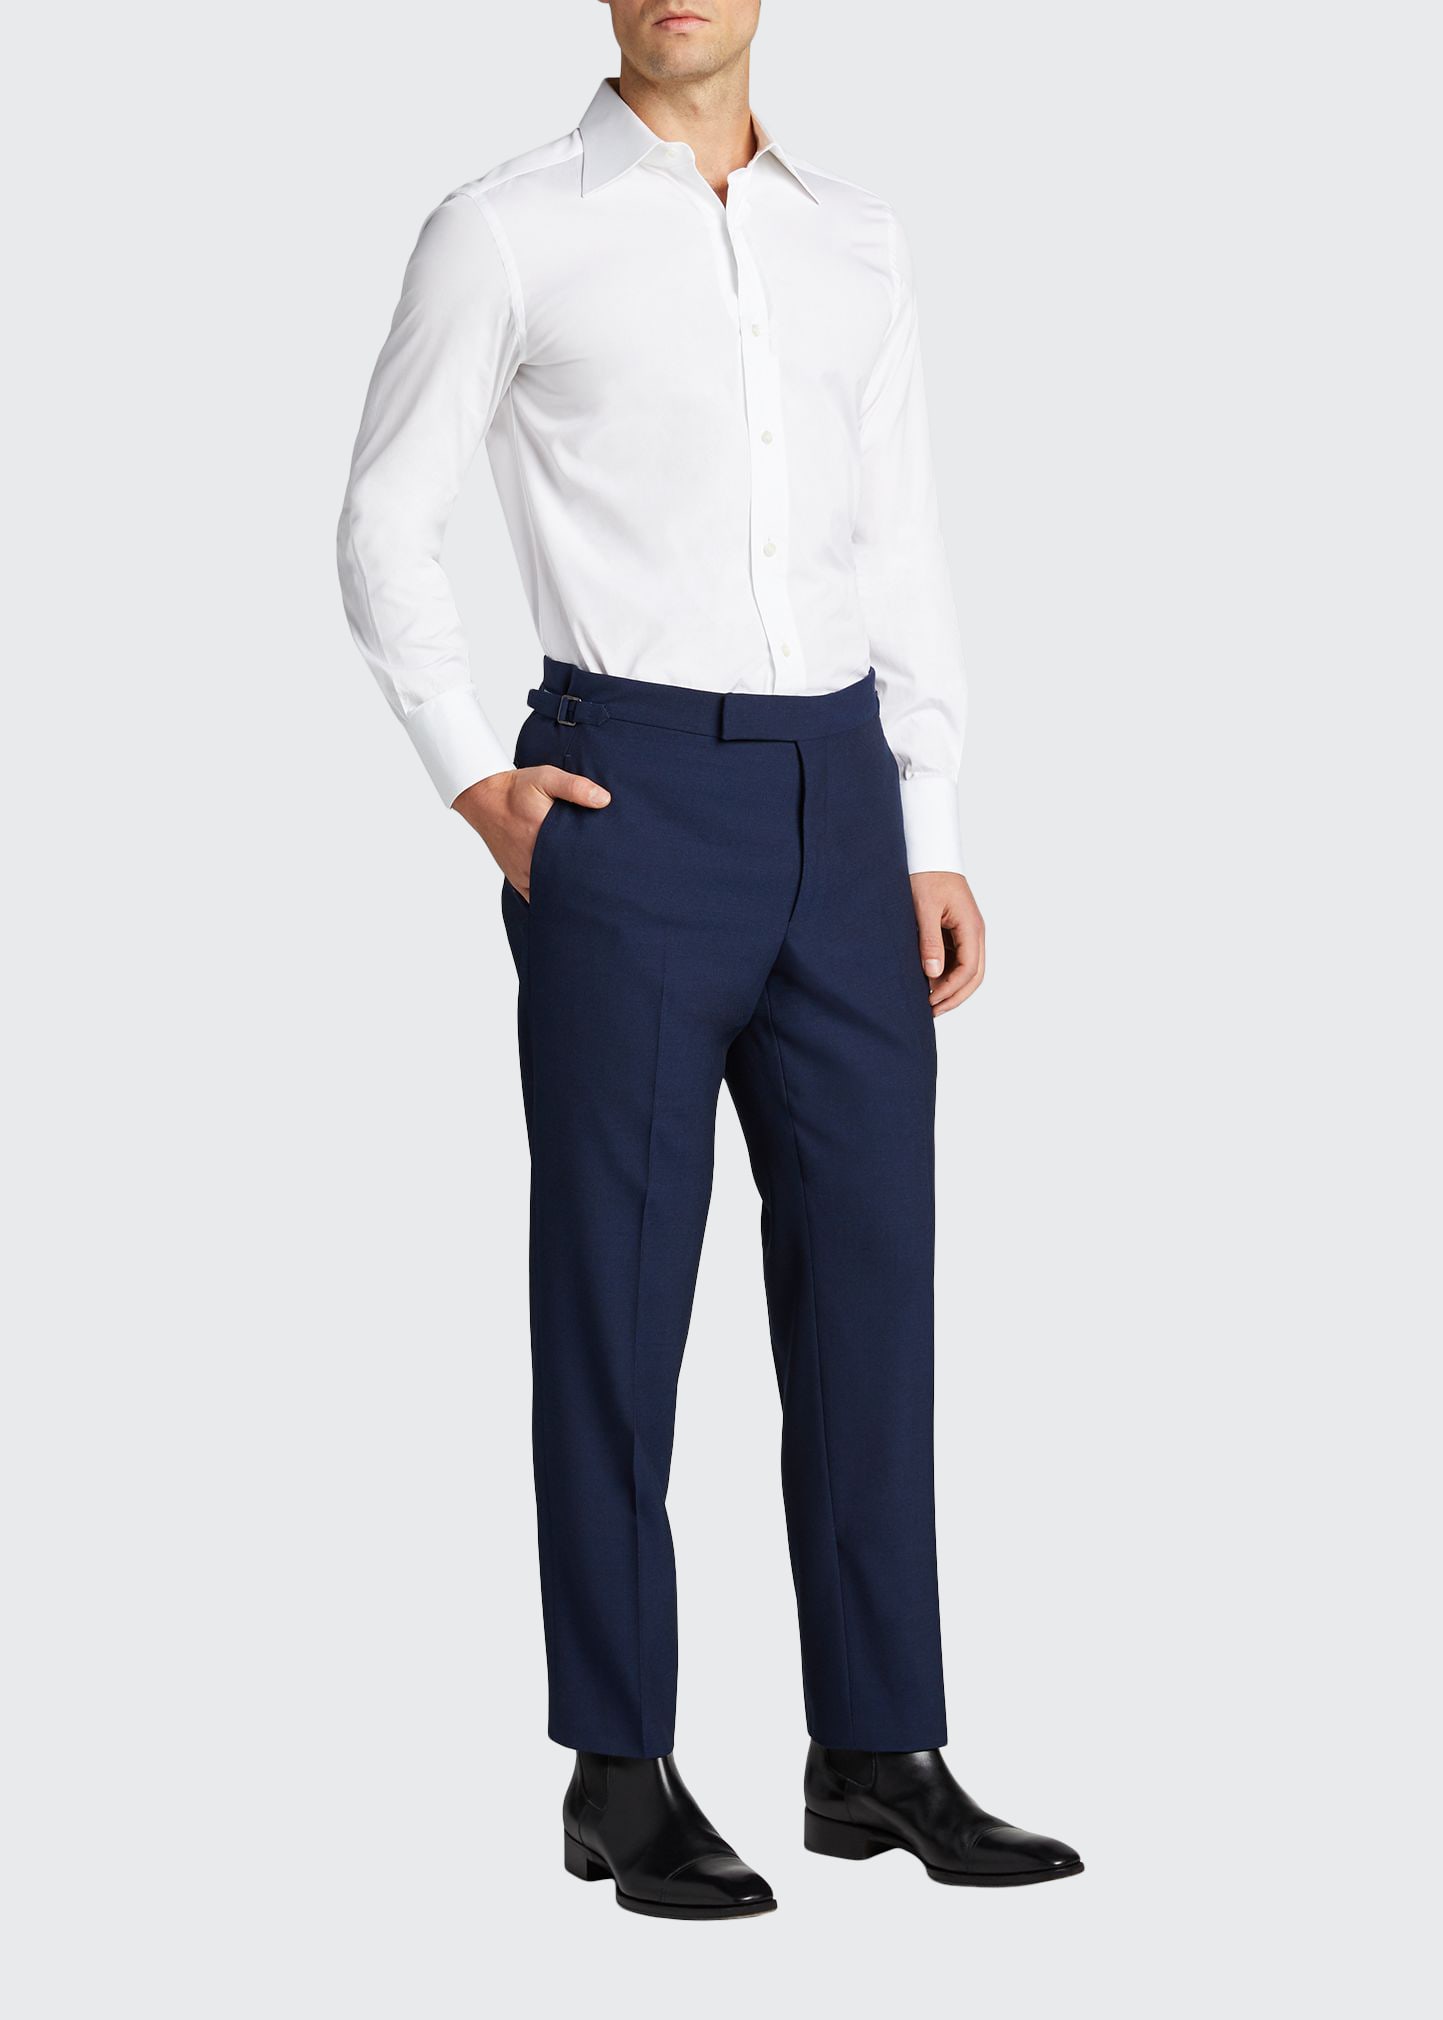 TOM FORD Men's O'Connor Base Wool Trousers - Bergdorf Goodman